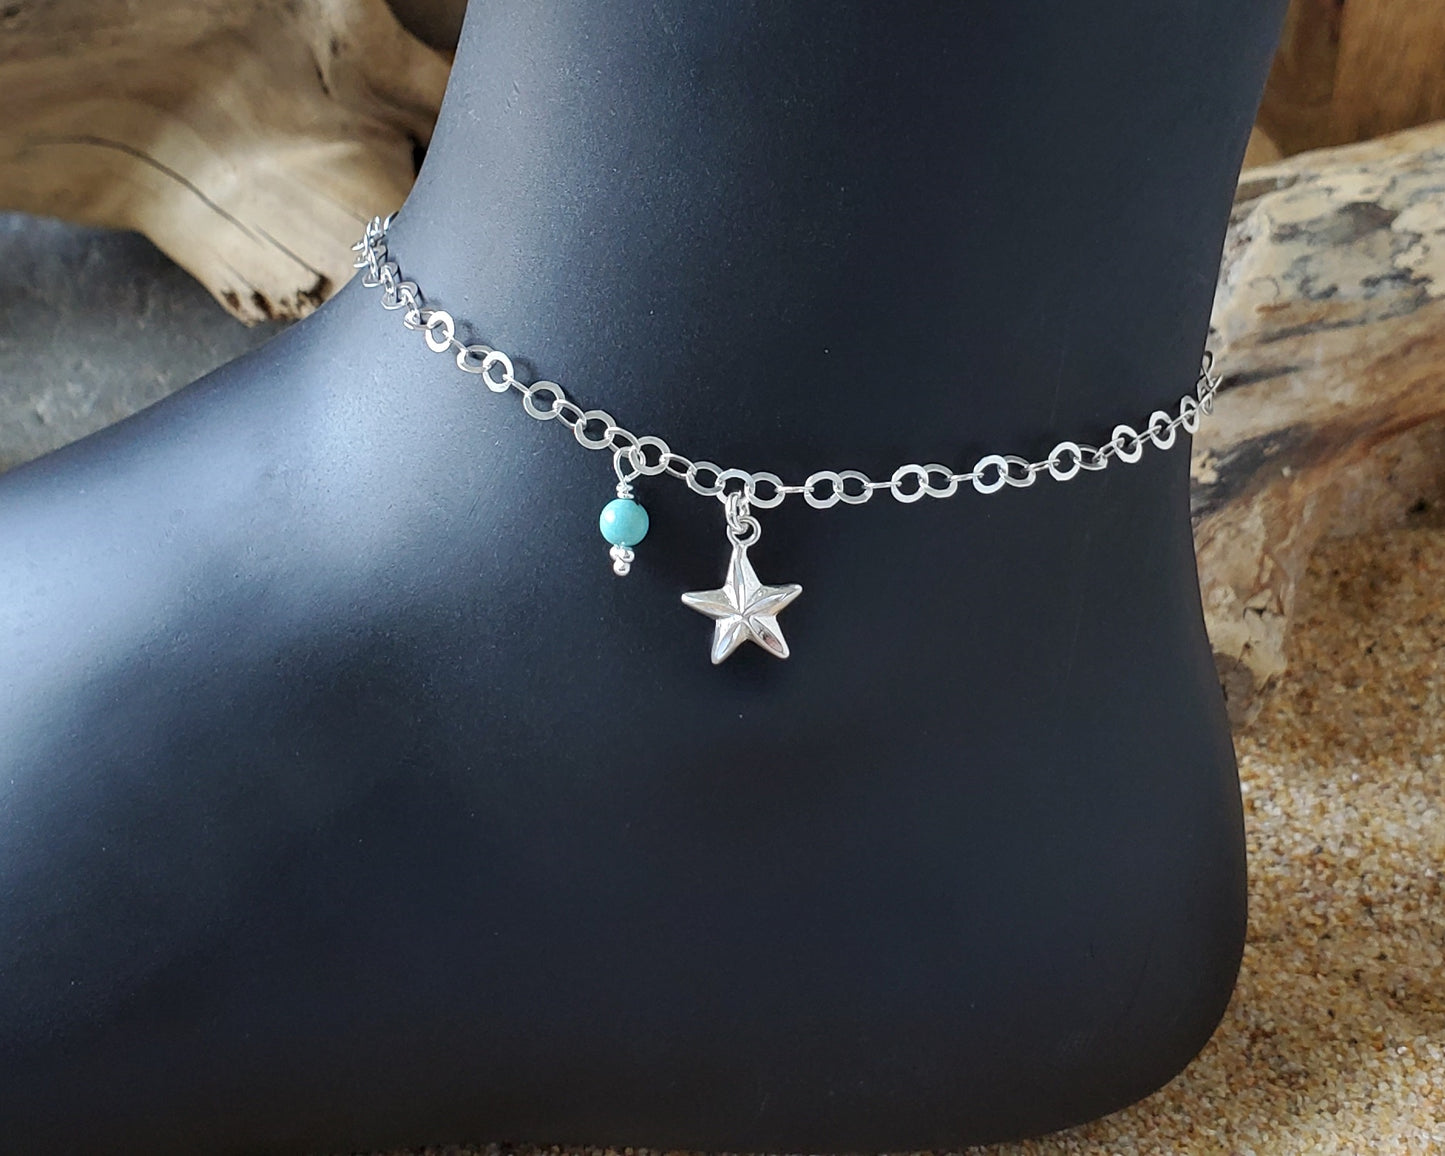 Personalized Star Birthstone Ankle Bracelet / Anklet, Handmade with solid Sterling Silver and Gemstone Birthstones